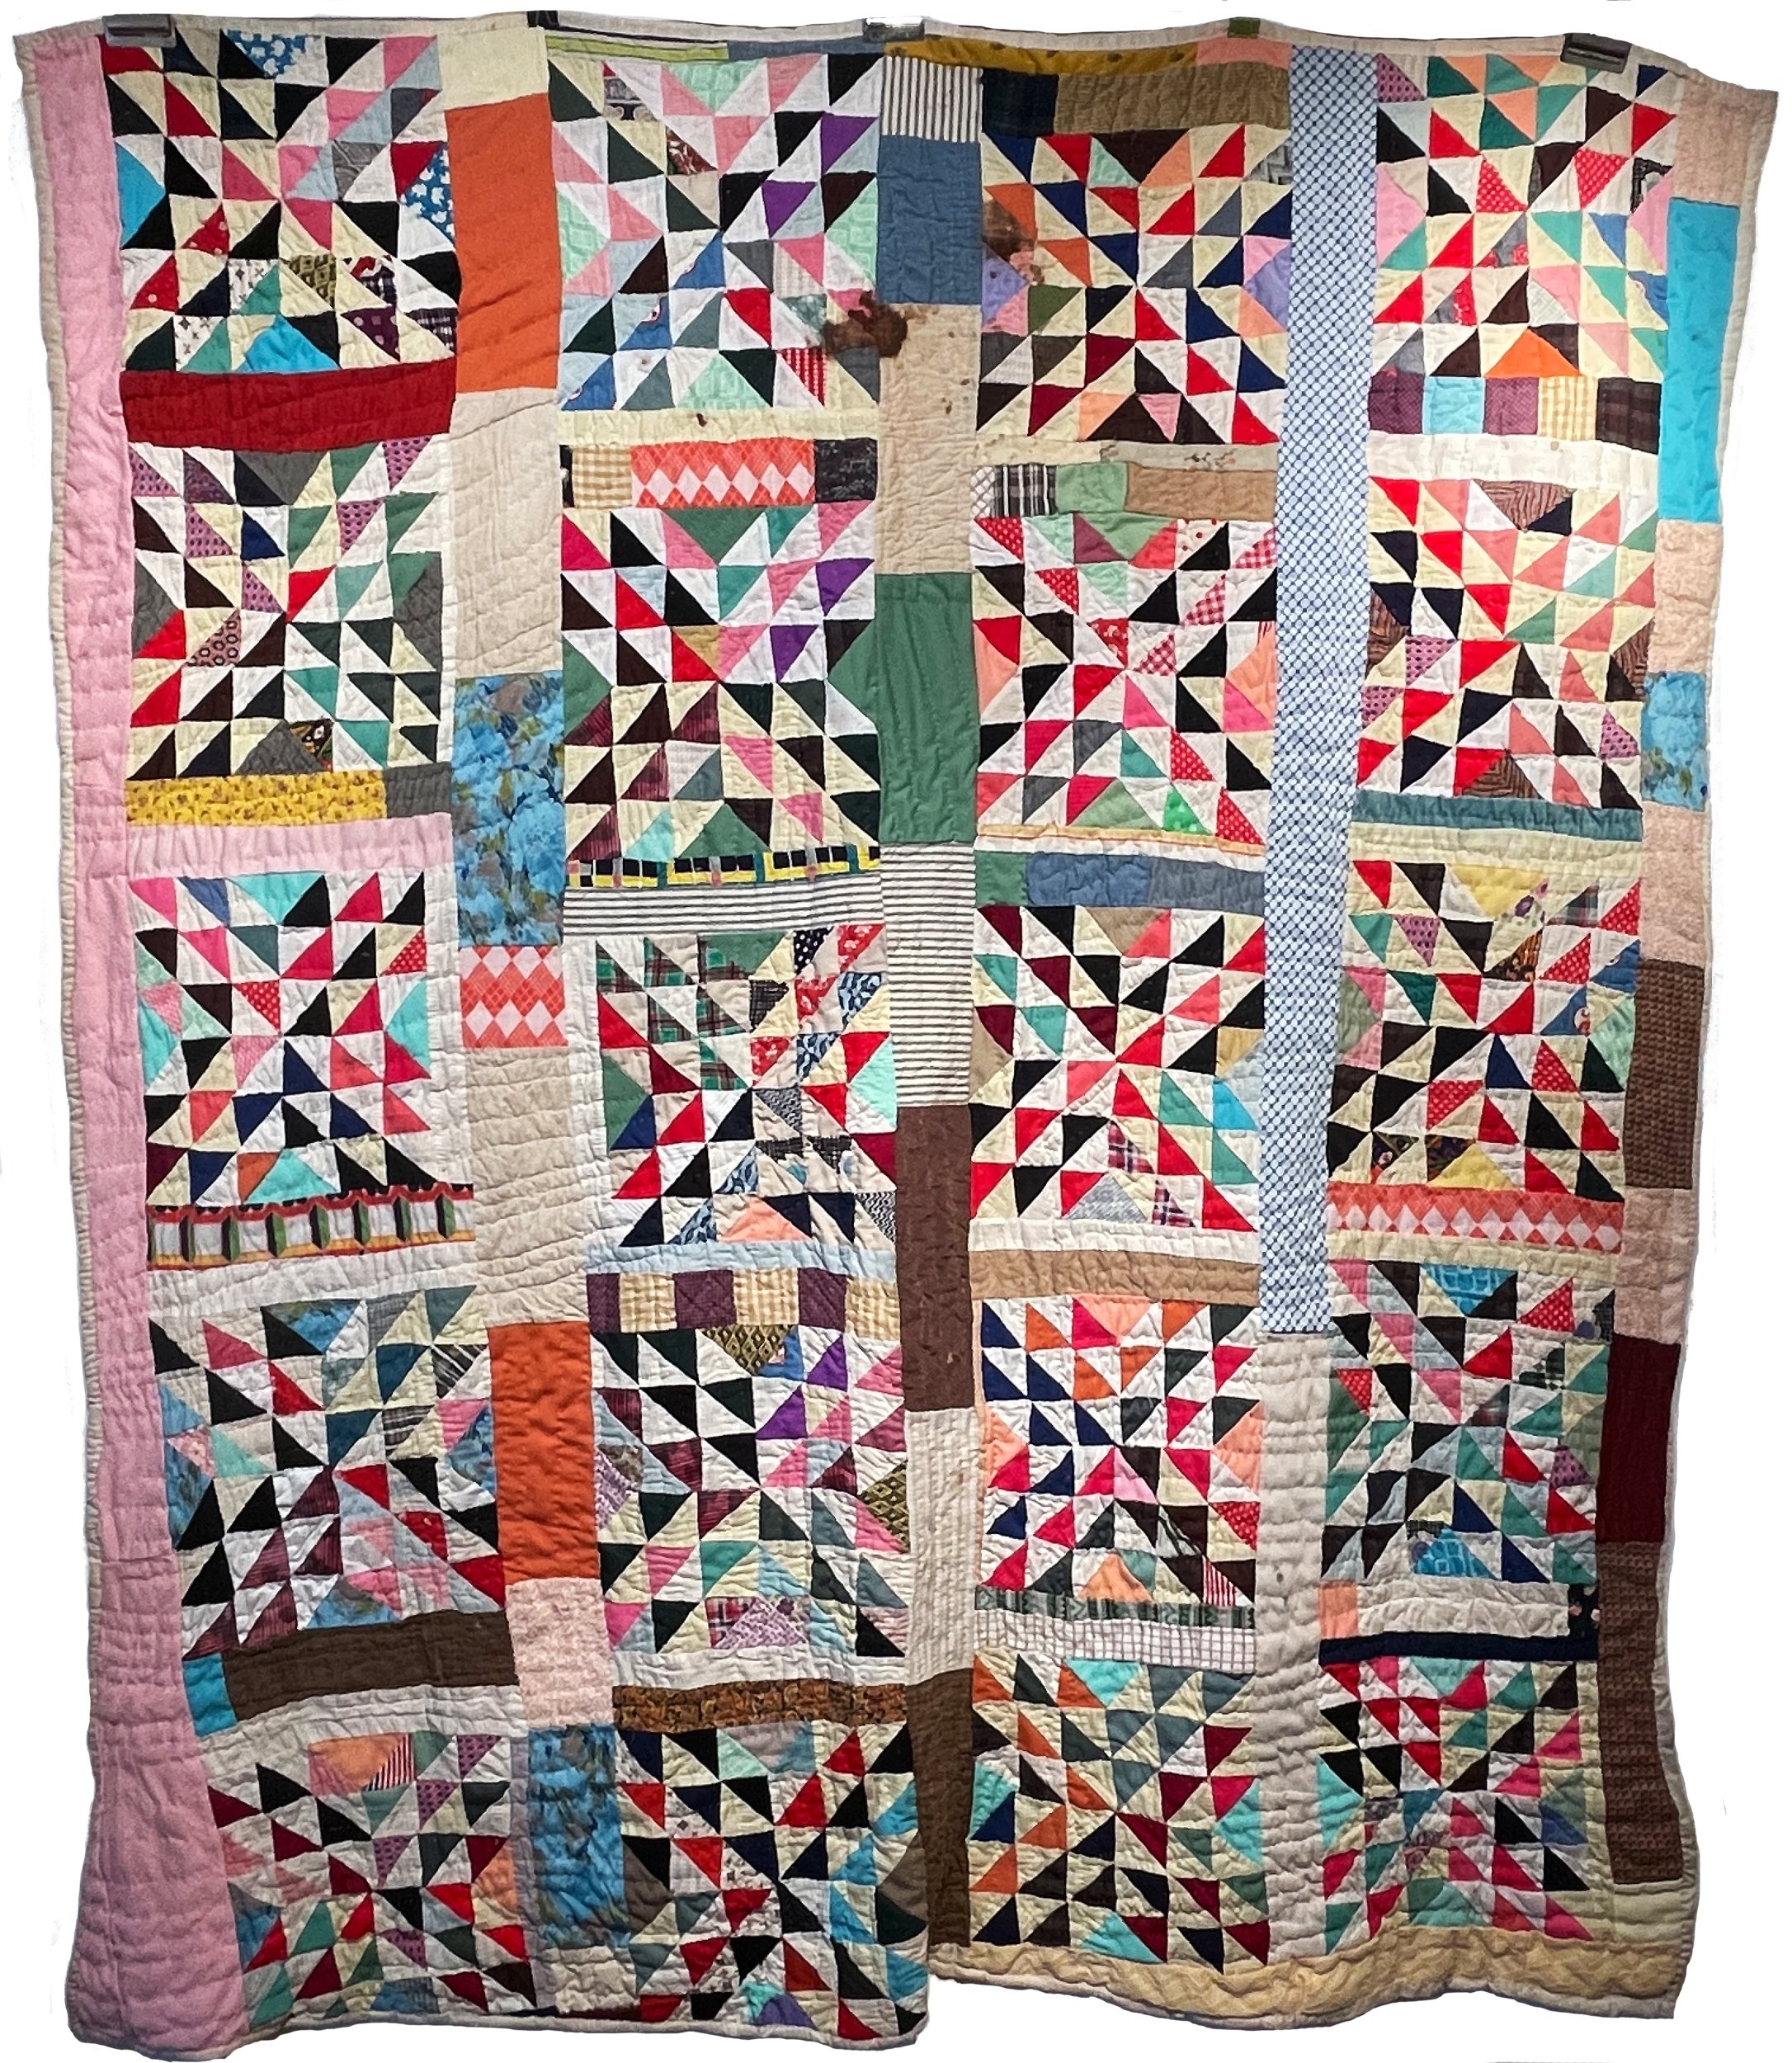   Quilt #156   Anonymous, 1950s-60s  85” x 73”  Various fabrics  Hand-pieced, hand-quilted    FIND OUT MORE   